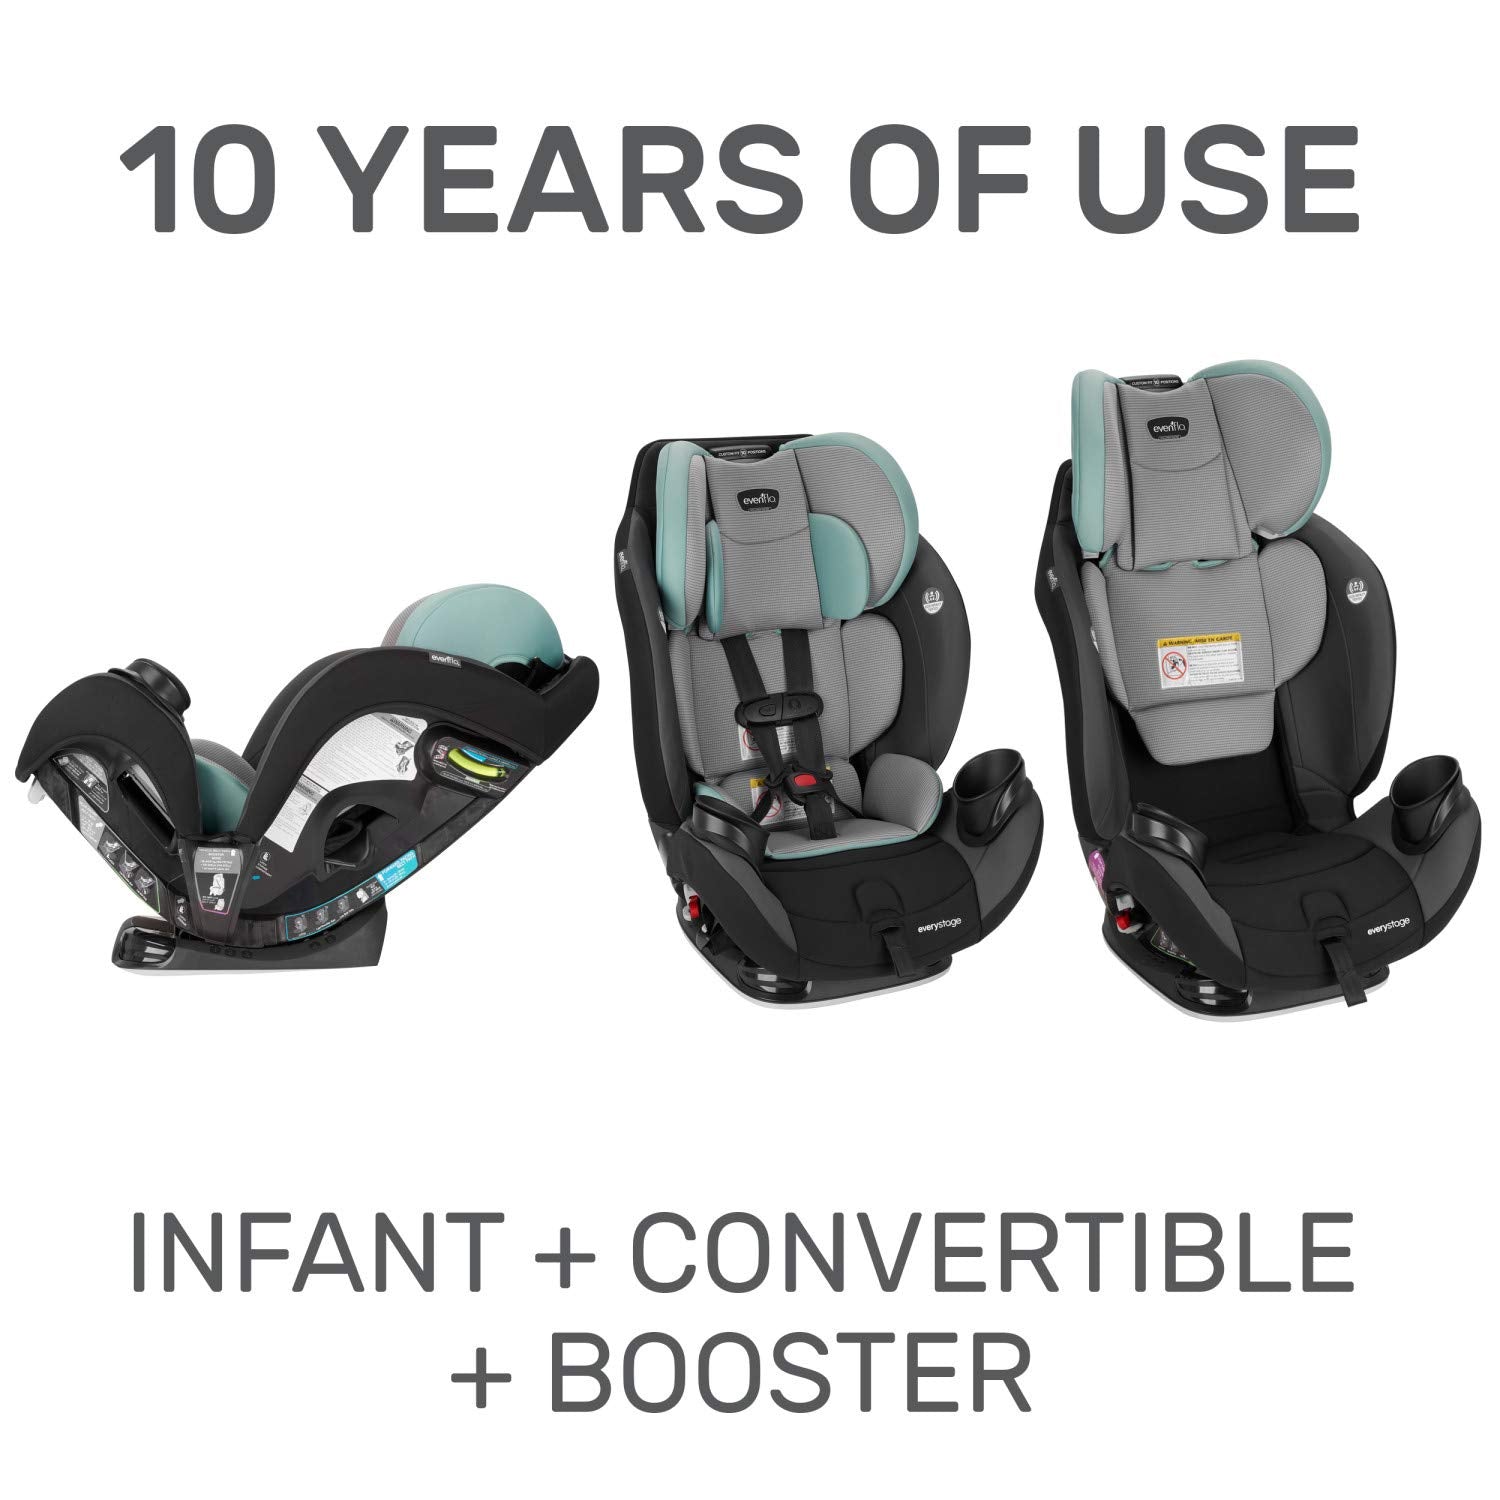 Evenflo EveryStage LX All-in-One Car Seat, Nova Green